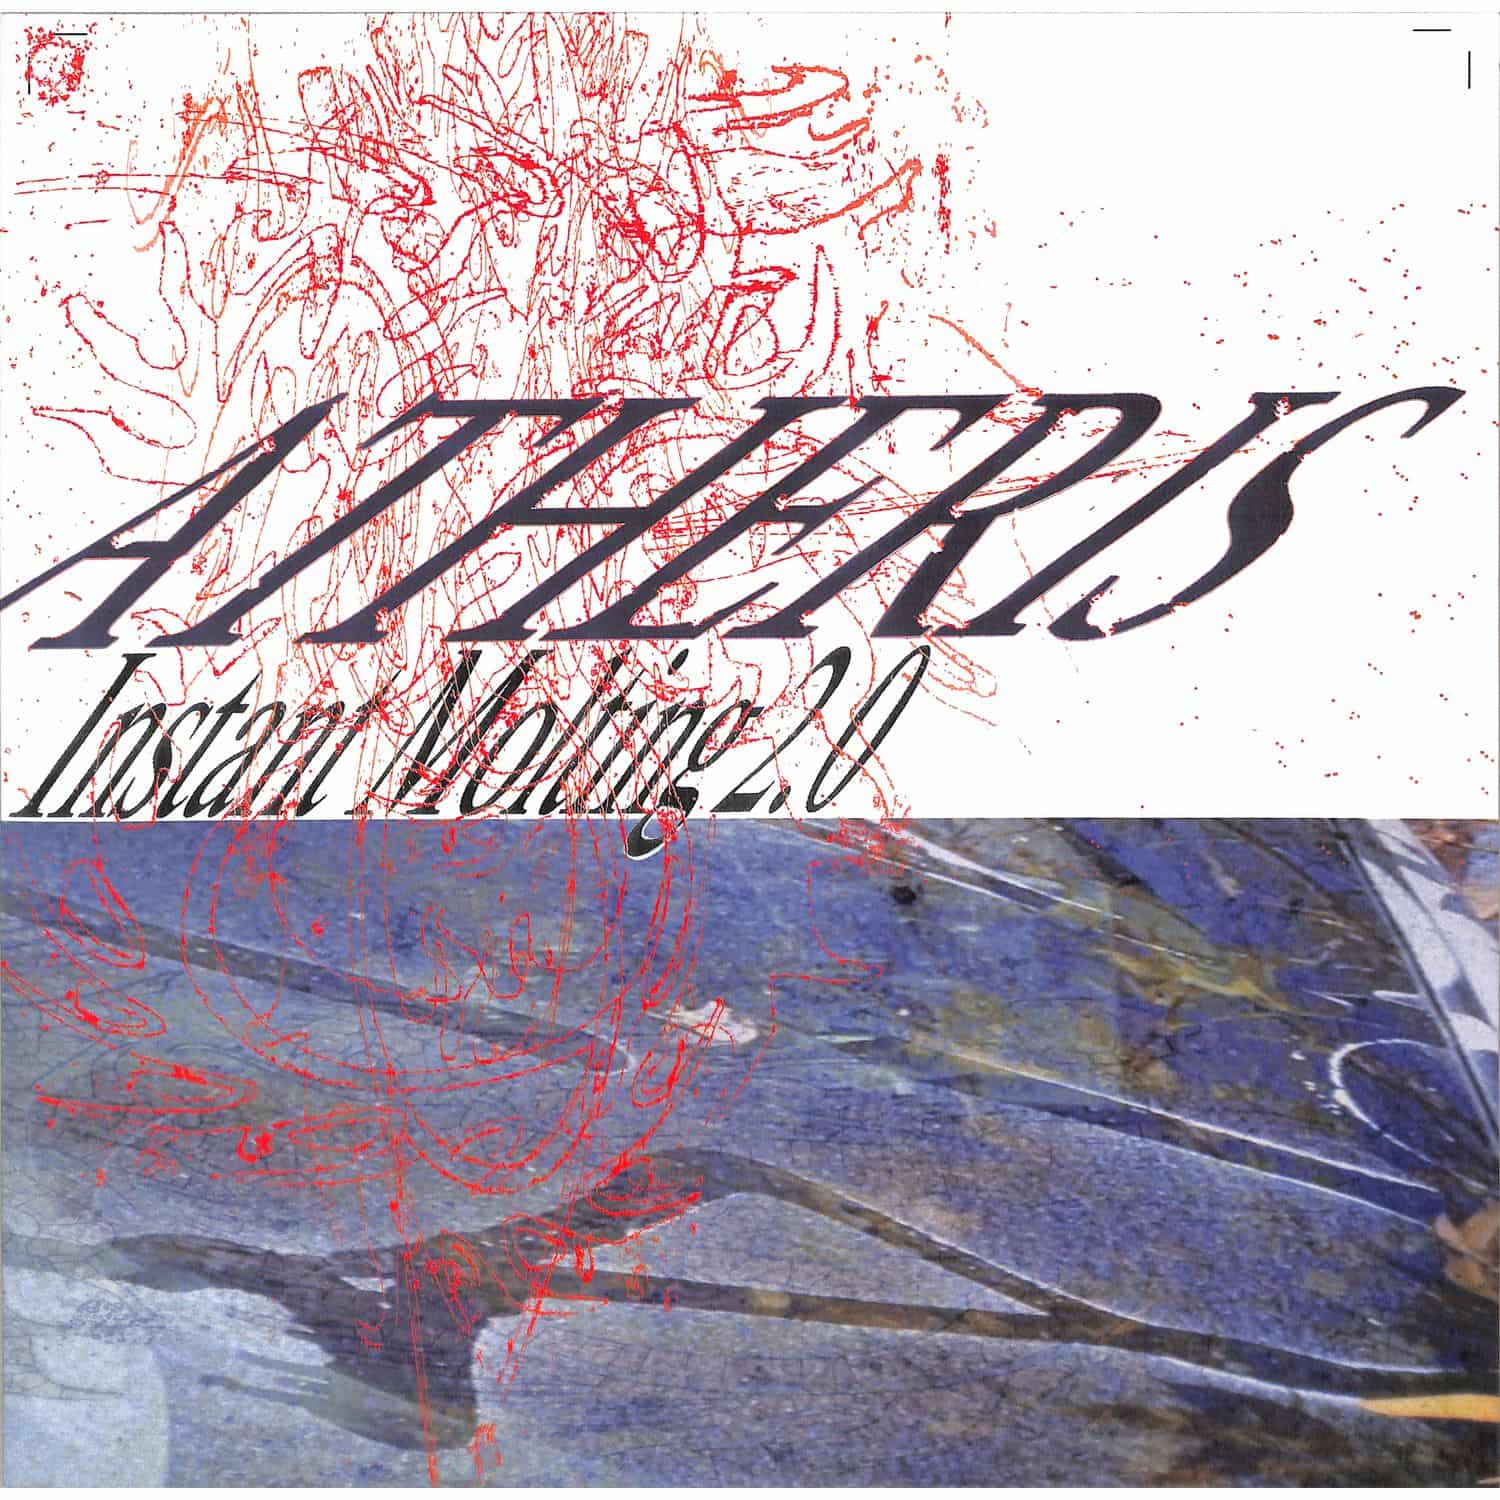 Atheris a.k.a. Julian Muller - INSTANT MOLTING 2.0 / RED PILL